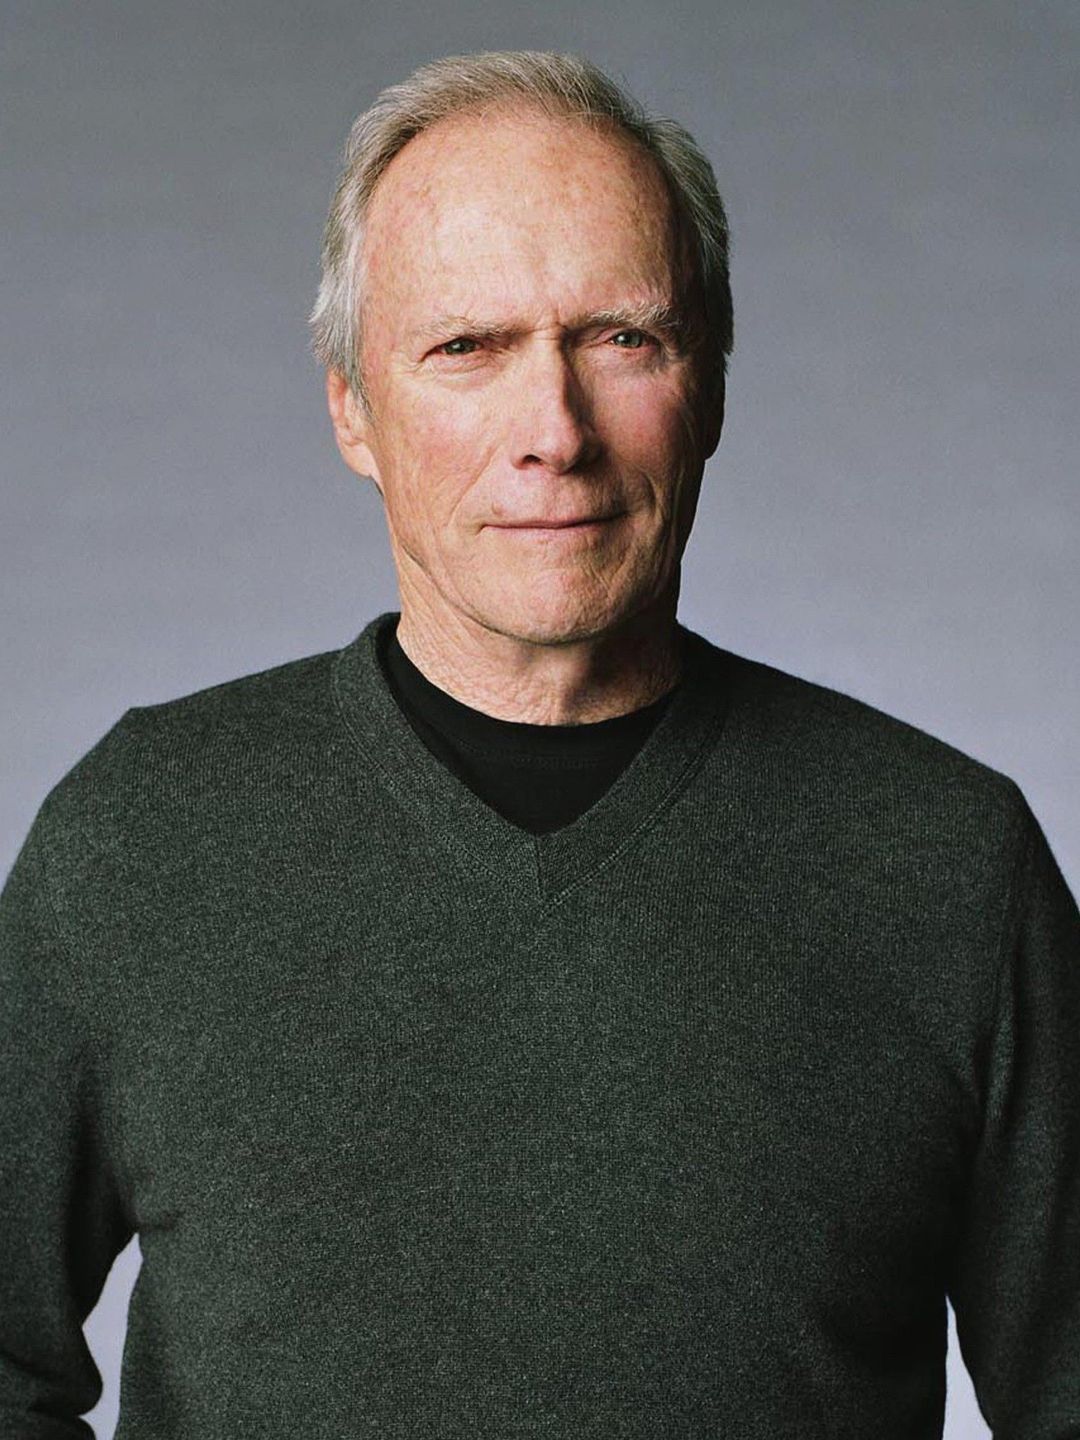 Clint Eastwood story of success